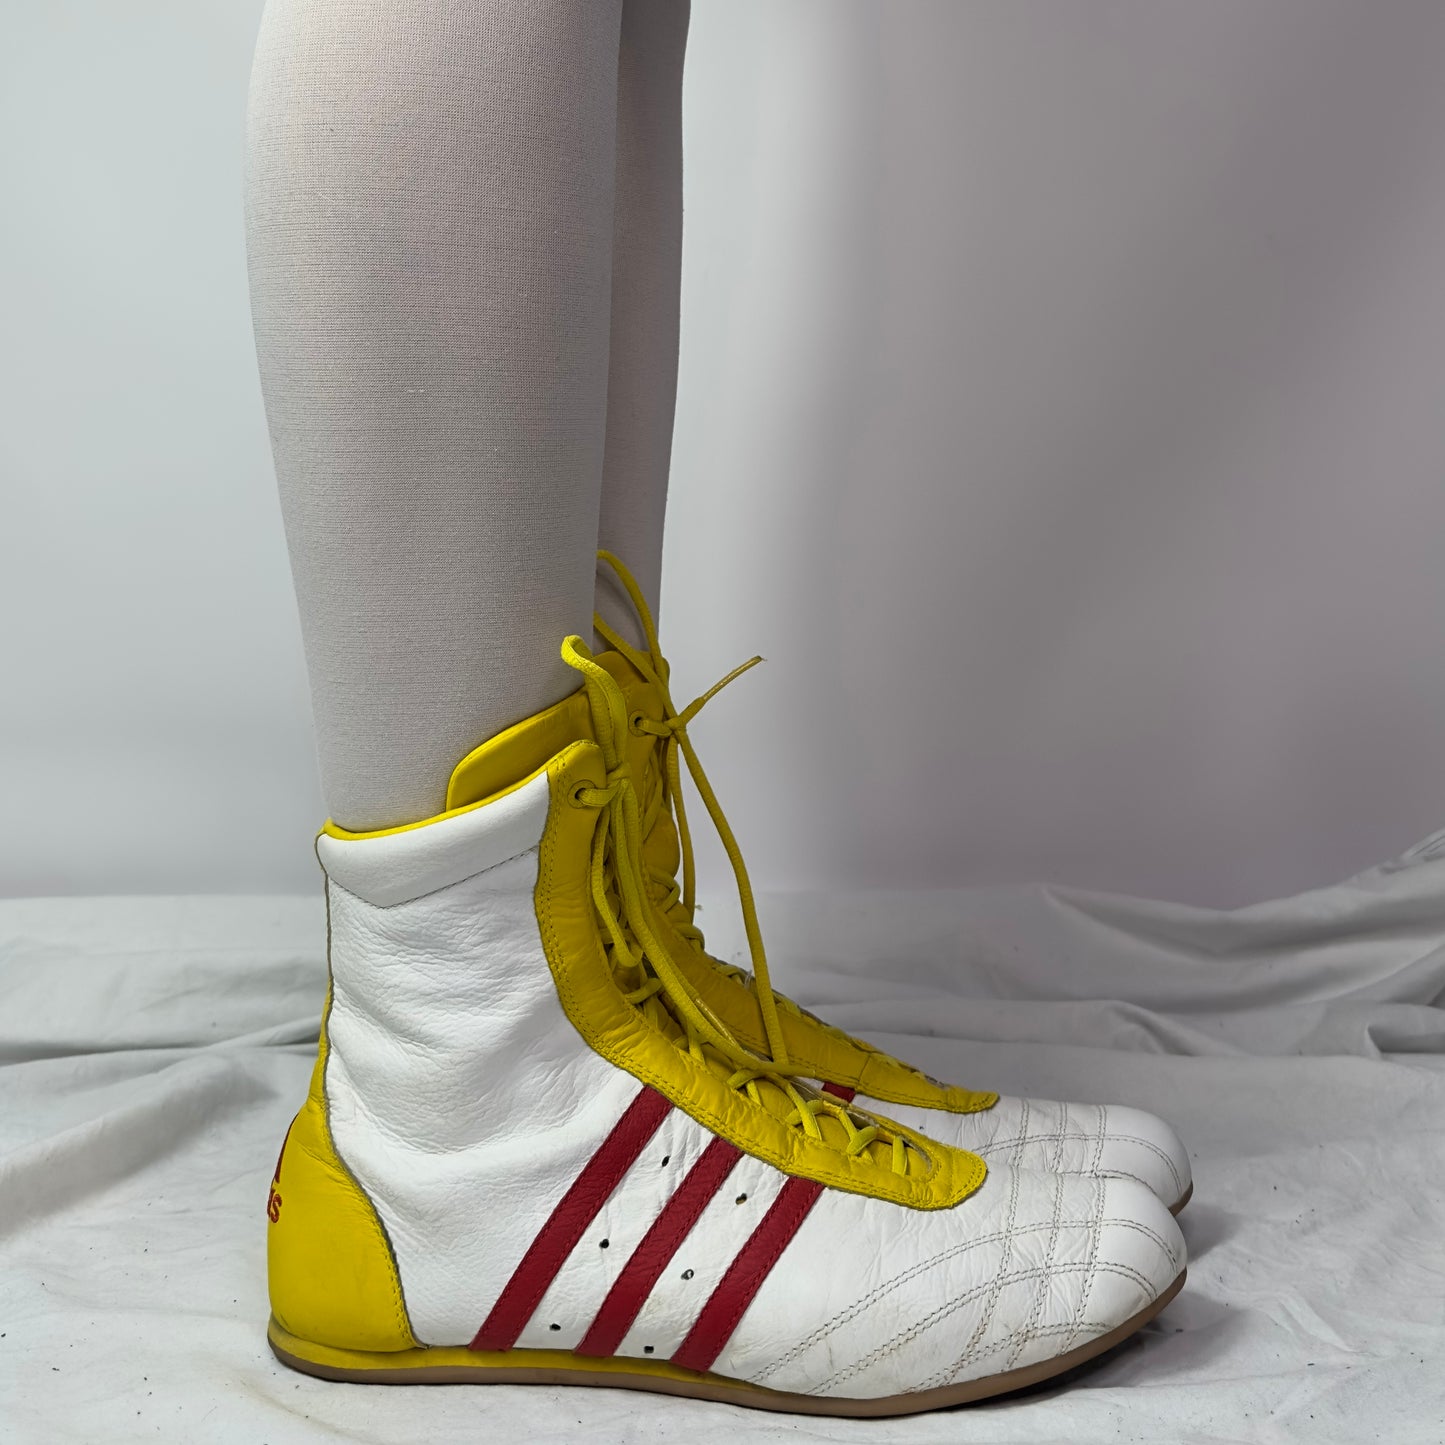 Adidas 2000s Vintage Boxing Wrestling Boots